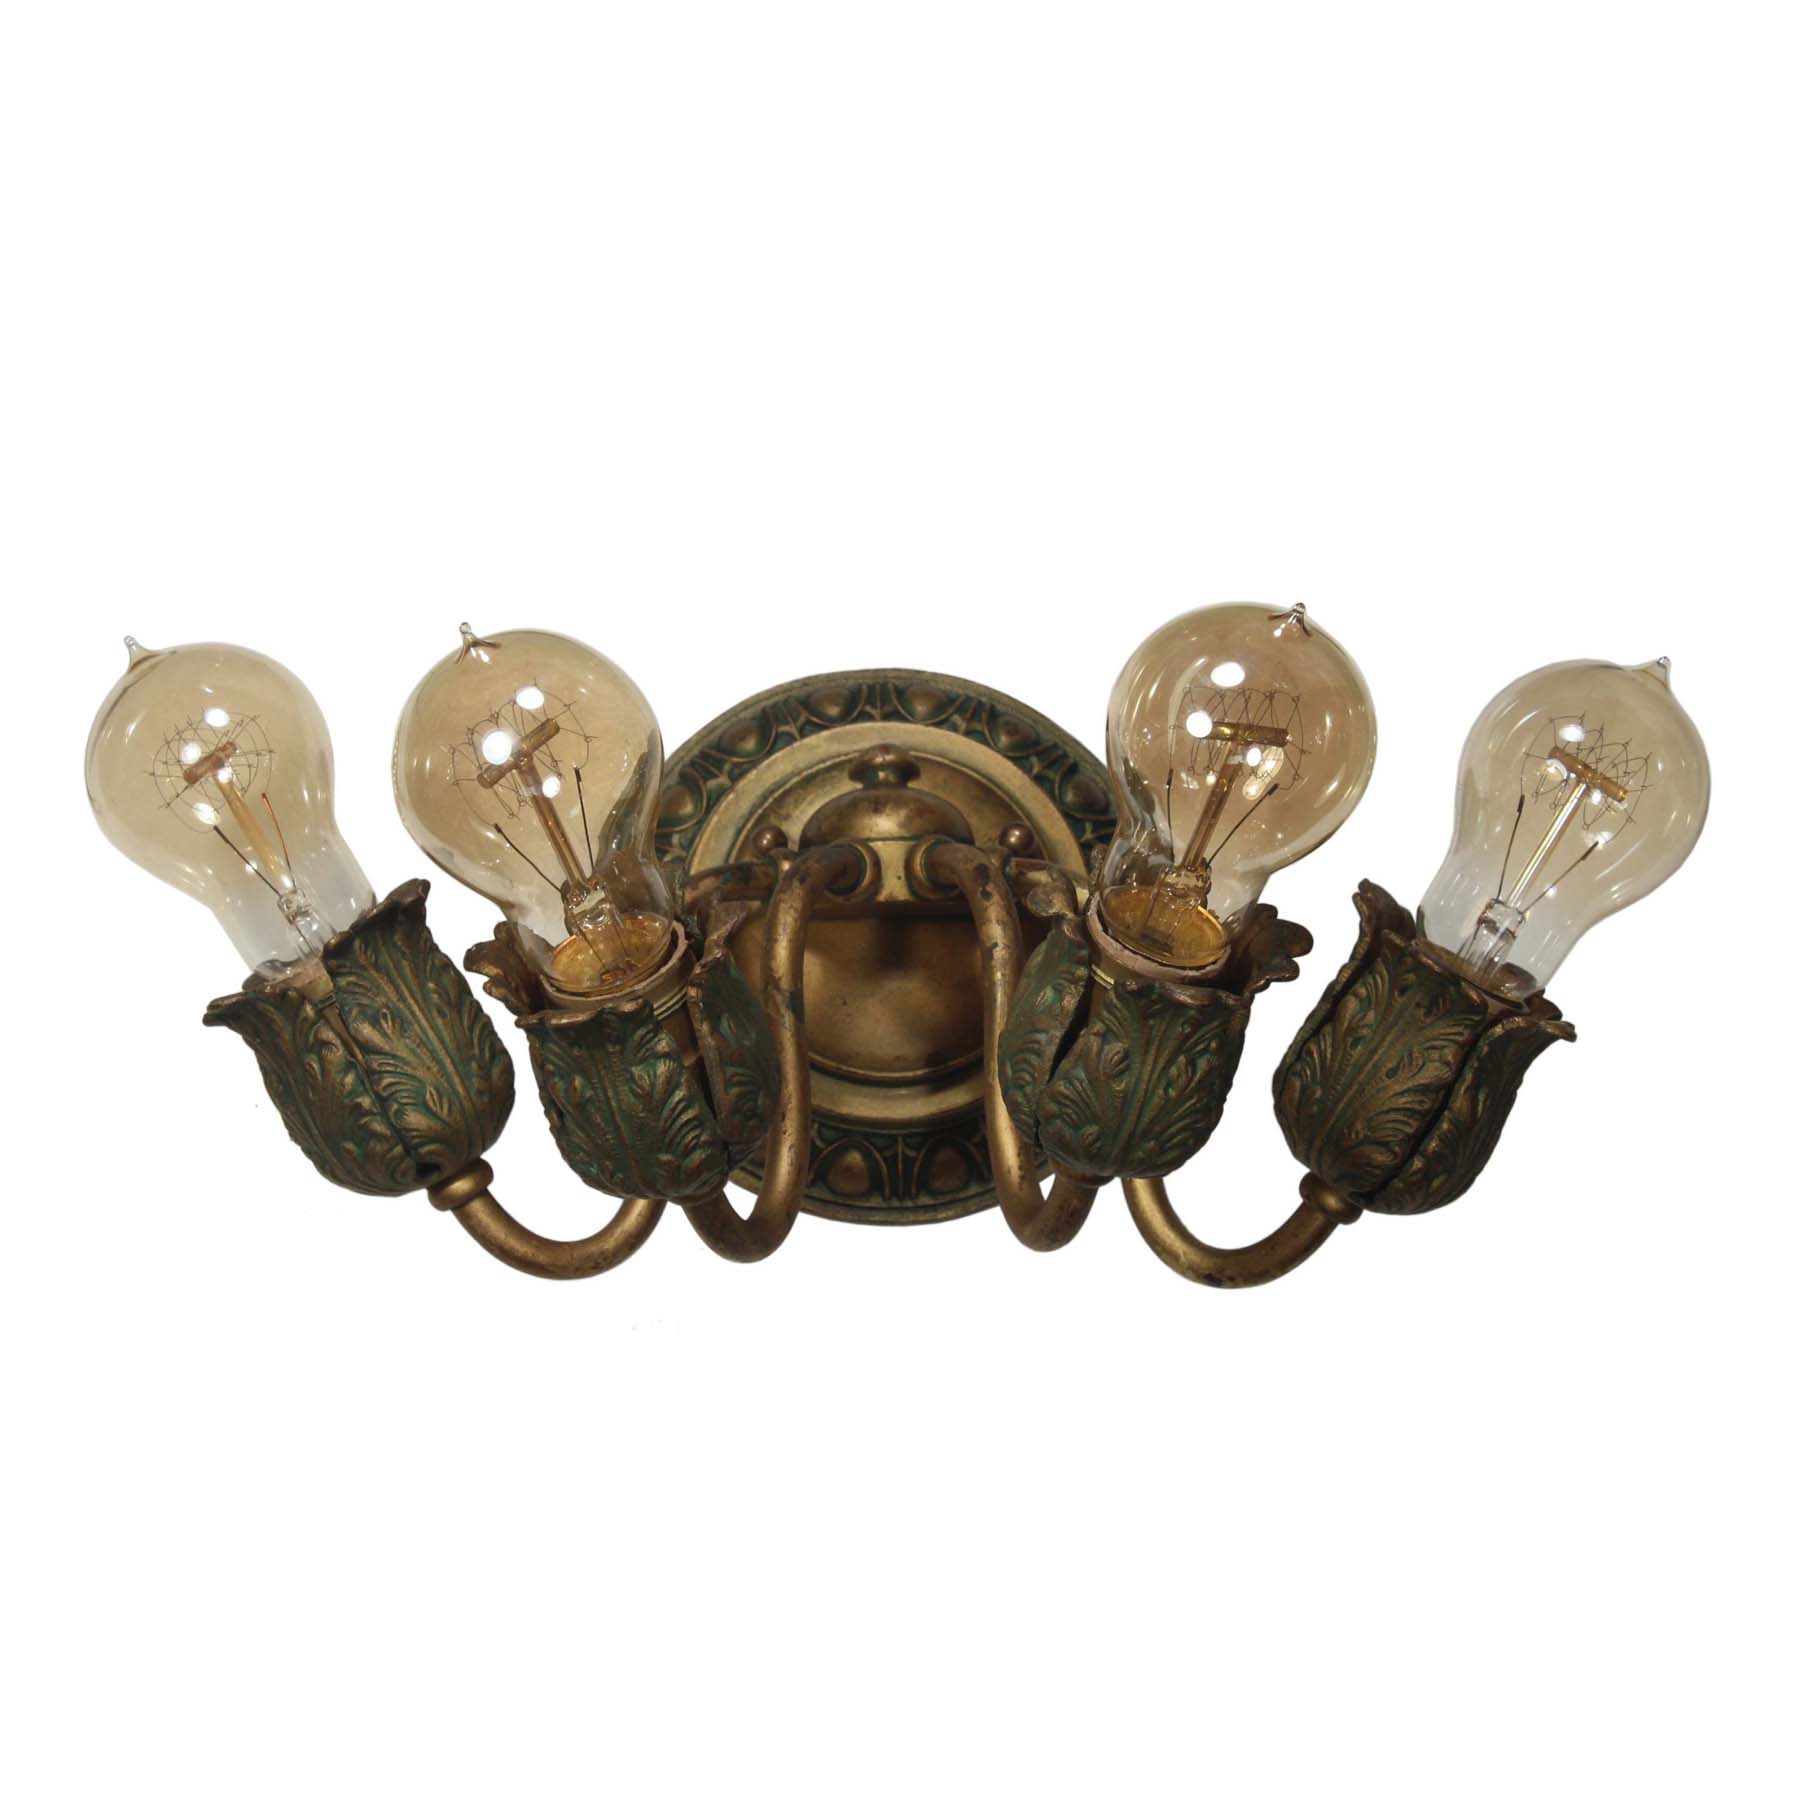 SOLD Antique Brass Four-Arm Sconce with Exposed Bulbs-67362